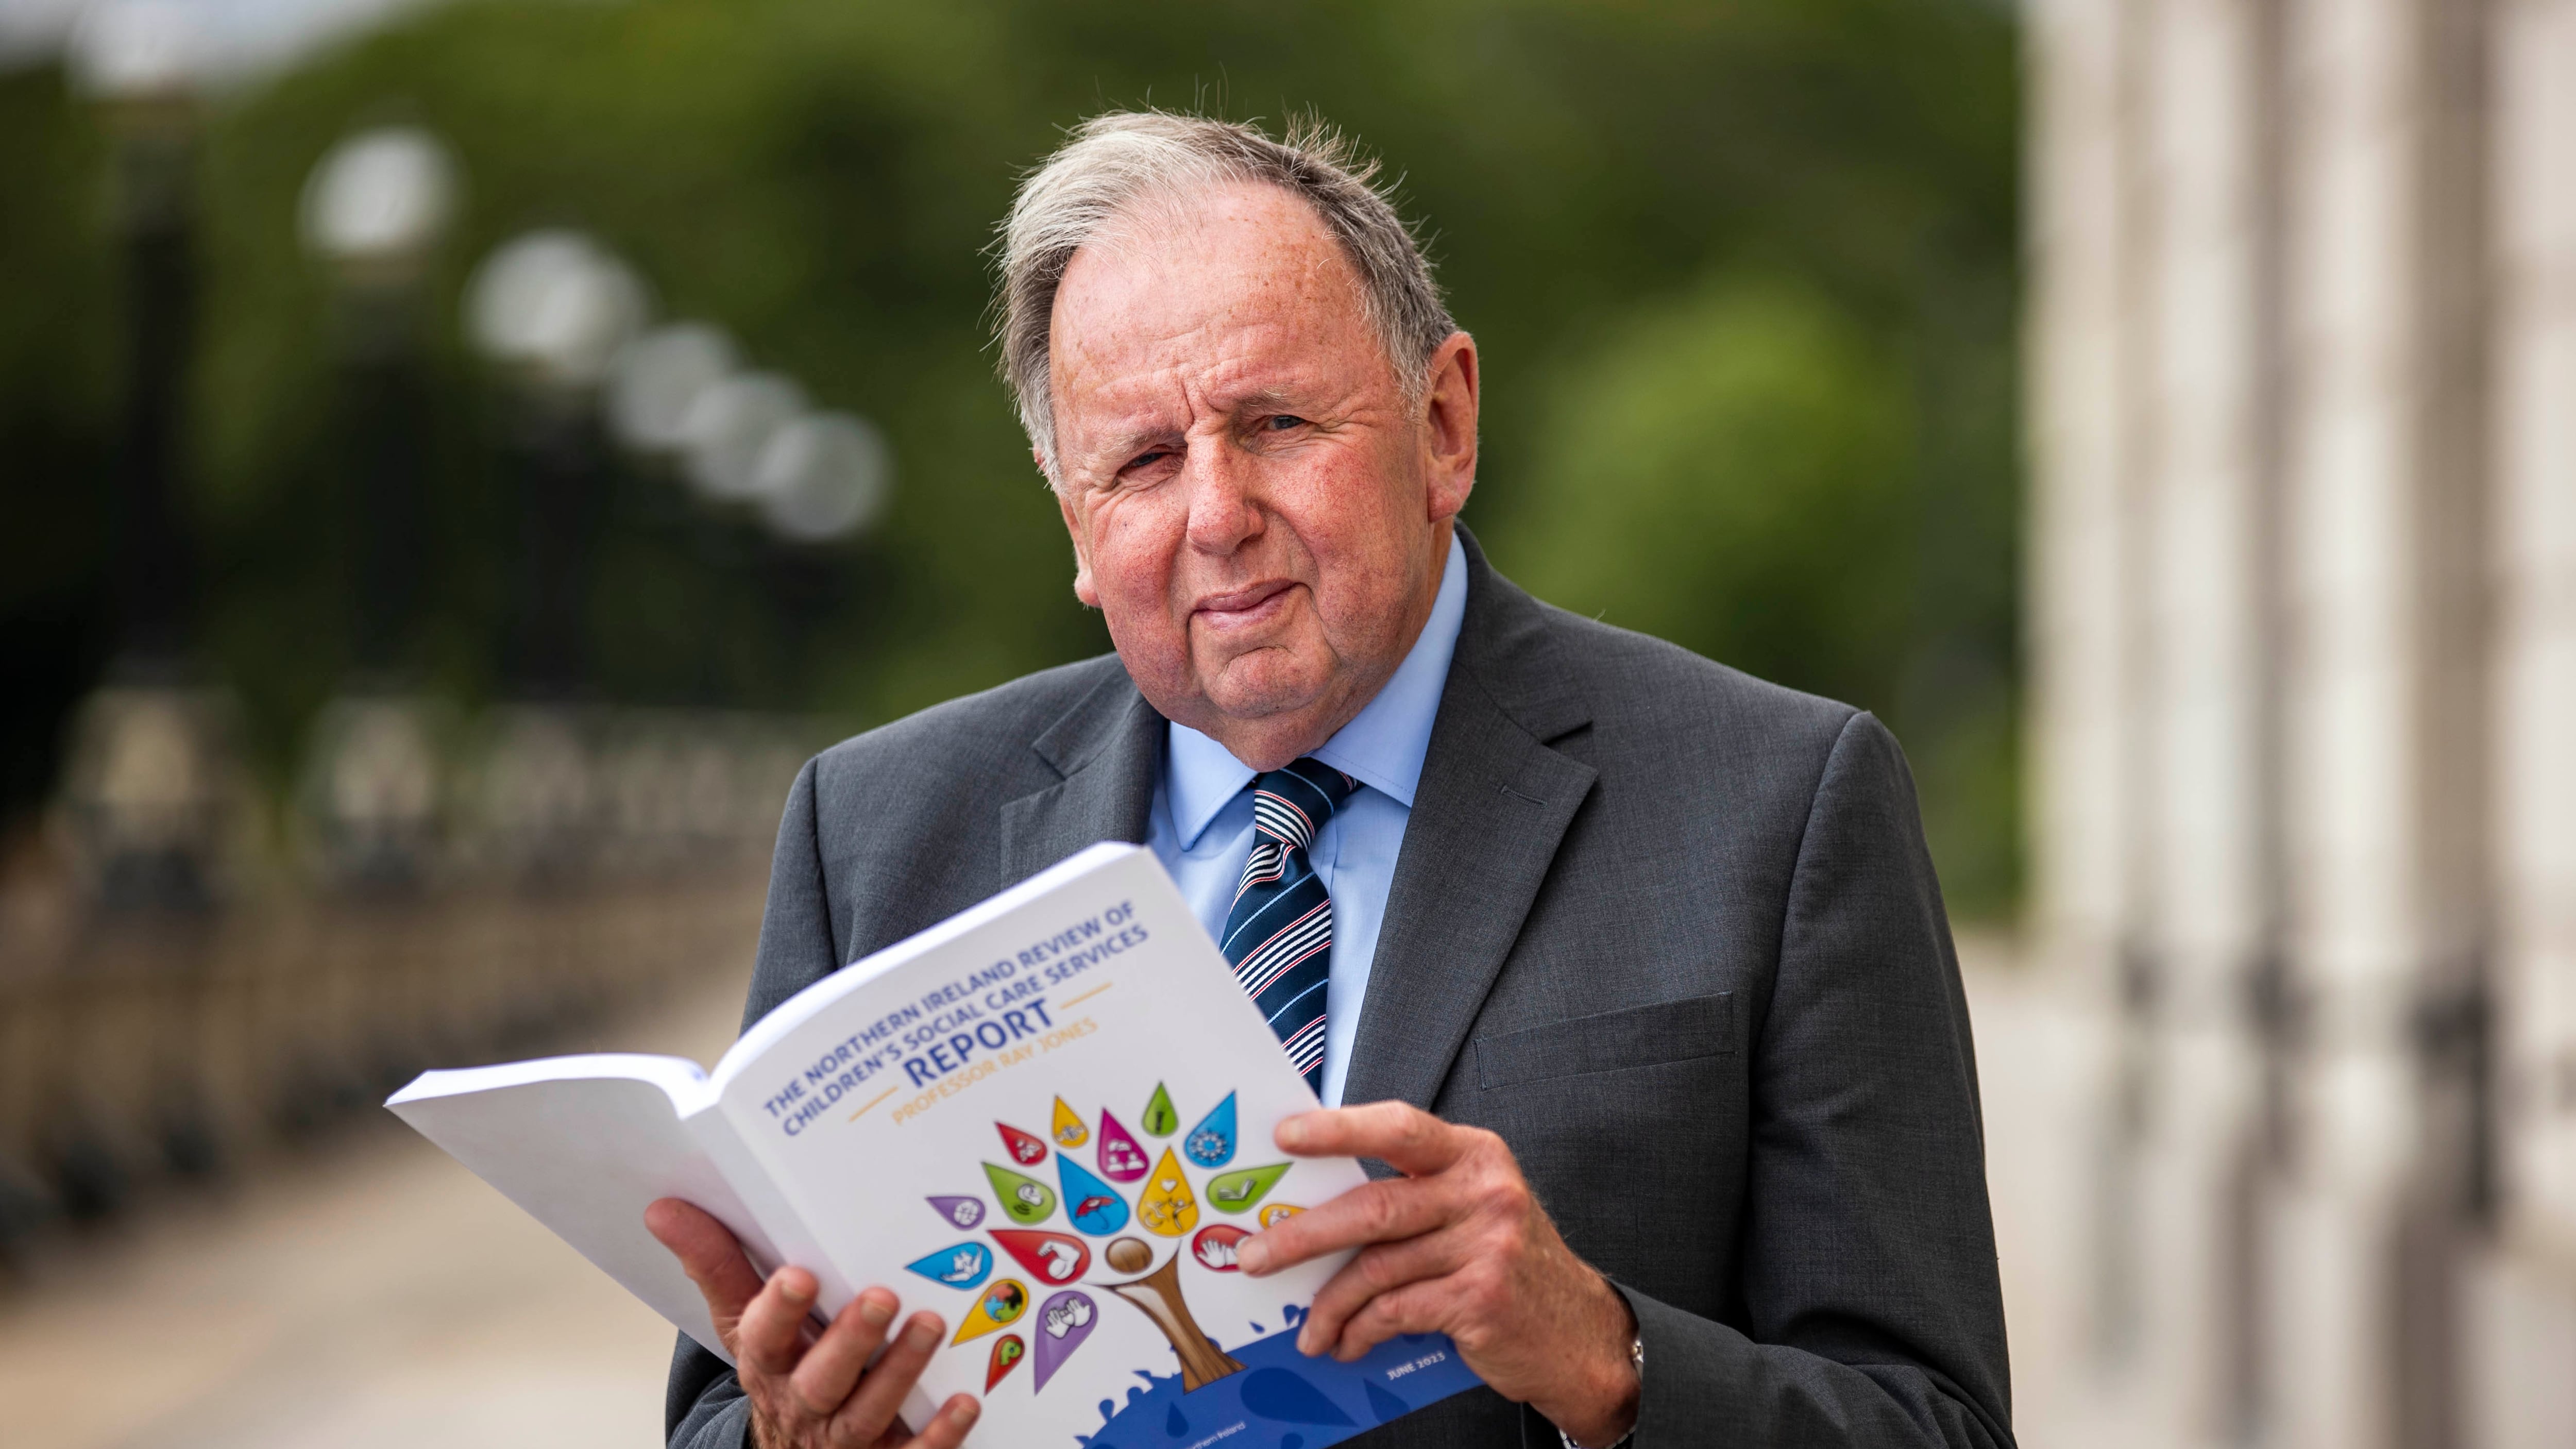 Professor Ray Jones with the Northern Ireland review of children's social care services report at Stormont last June. PICTURE: LIAM MCBURNEY/PA WIRE